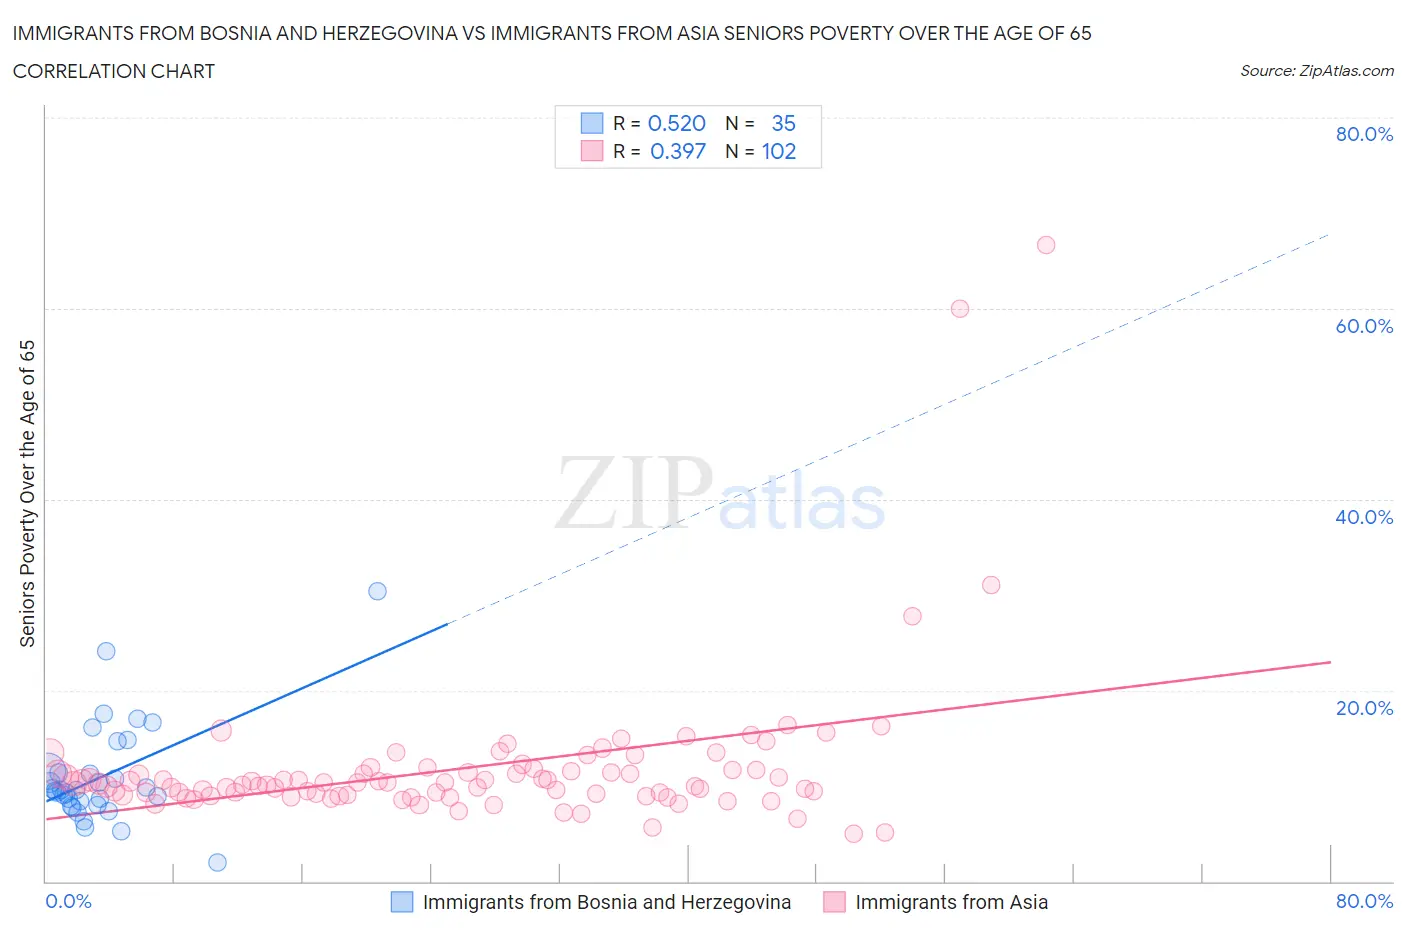 Immigrants from Bosnia and Herzegovina vs Immigrants from Asia Seniors Poverty Over the Age of 65